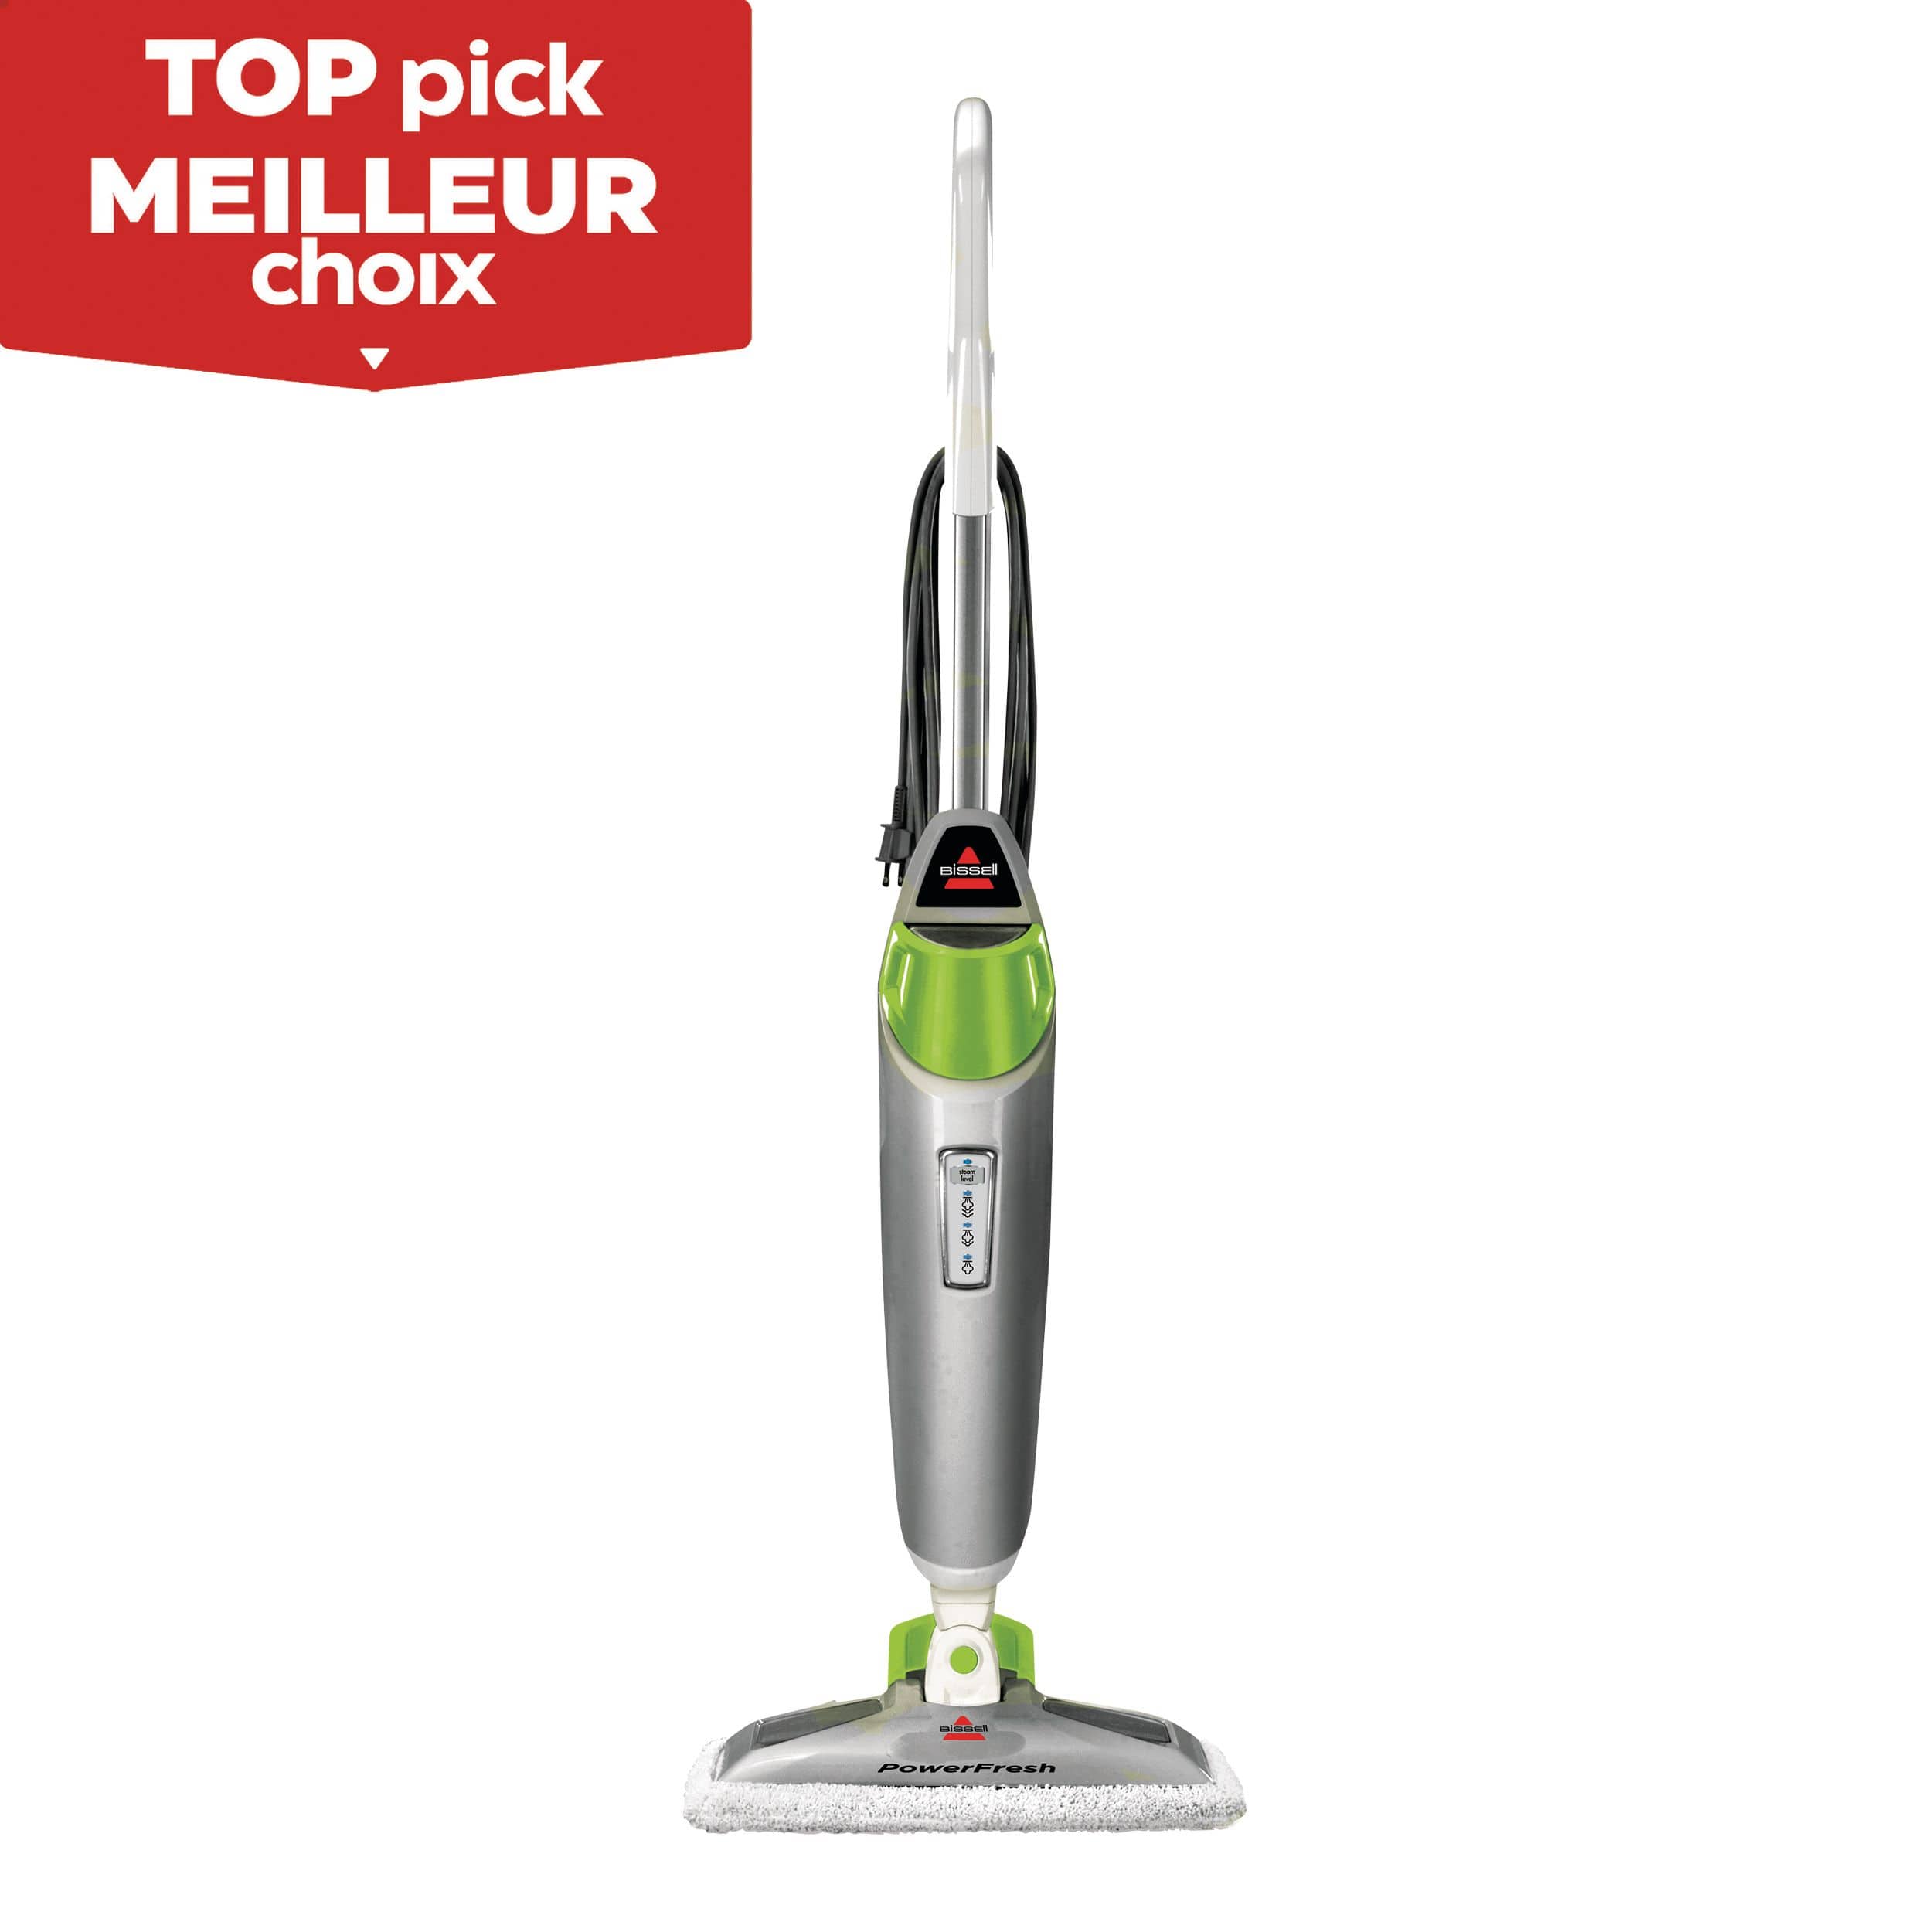 https://media-www.canadiantire.ca/product/living/cleaning/vacuums-and-floorcare/0437813/bissell-powerfresh-steam-mop-8493e082-1d4d-4e1c-951b-0f2864808910-jpgrendition.jpg